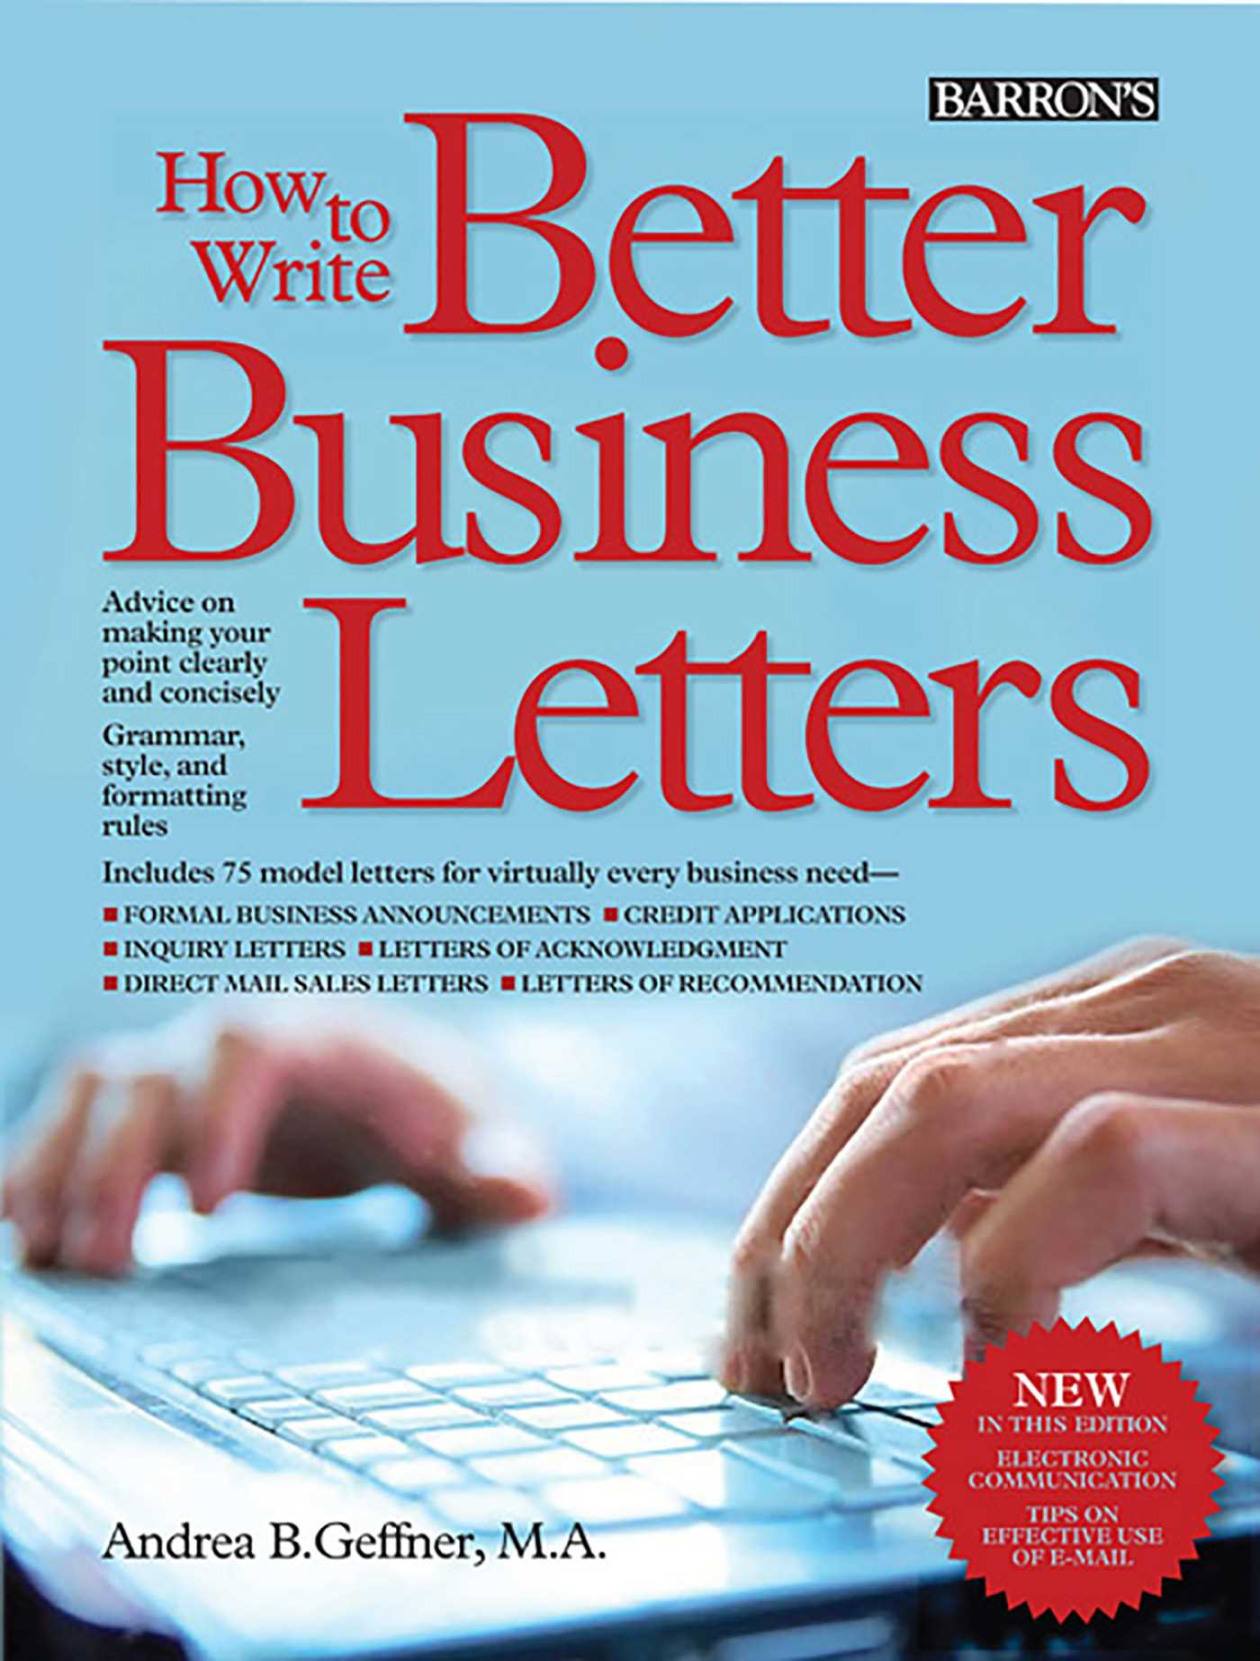 How to Write Better Business Letters  Book by Andrea B